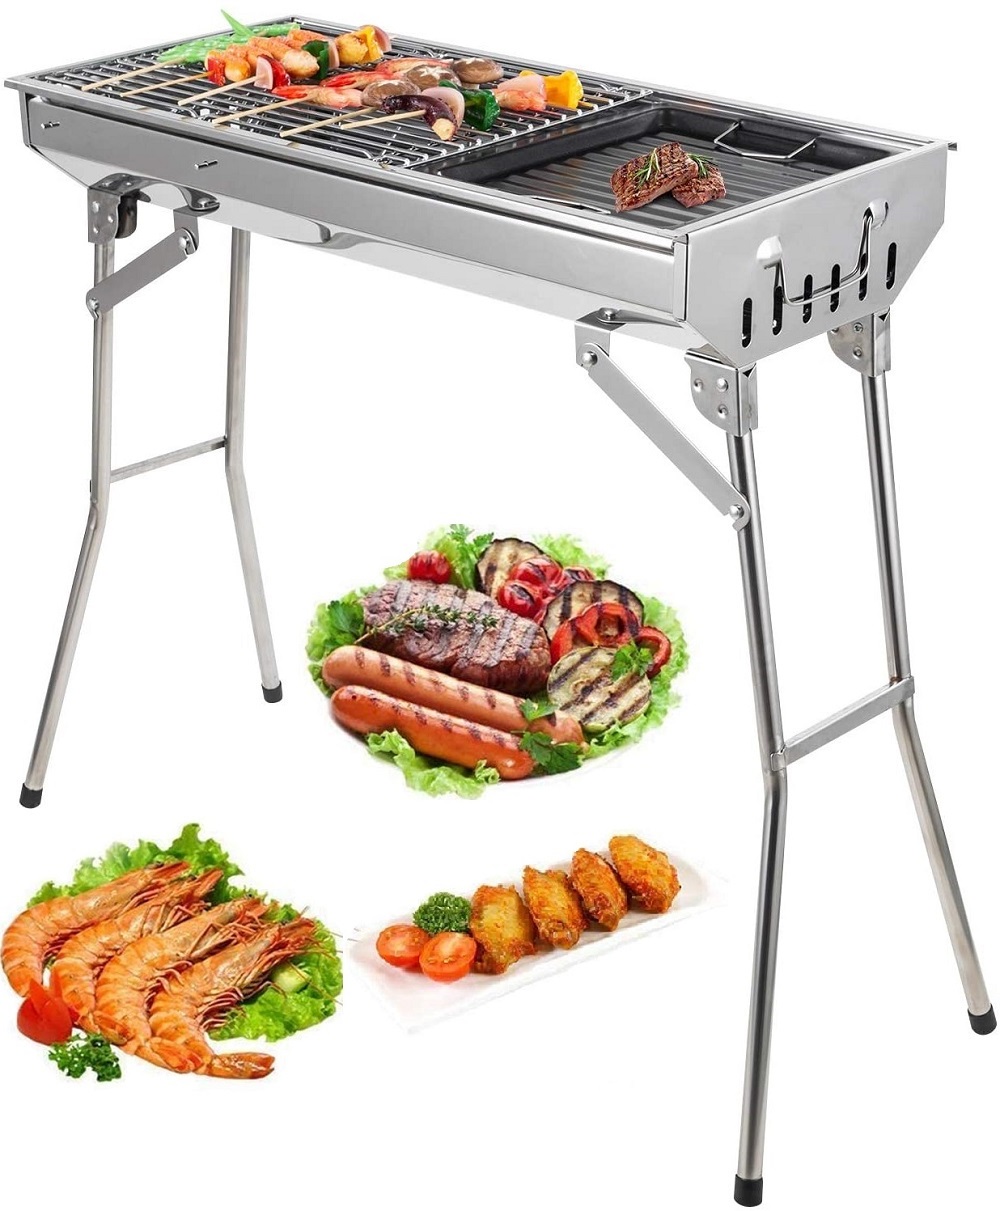 Charcoal BBQ Grill Outdoor Grill, SEGMART 28" Portable BBQ Charcoal Grill Lightweight BBQ Grill, Small Portable Charcoal Grill w/ Handle & Adjustable Grate, Stainless Steel, Easy Clean, Silver, H390 - image 1 of 12